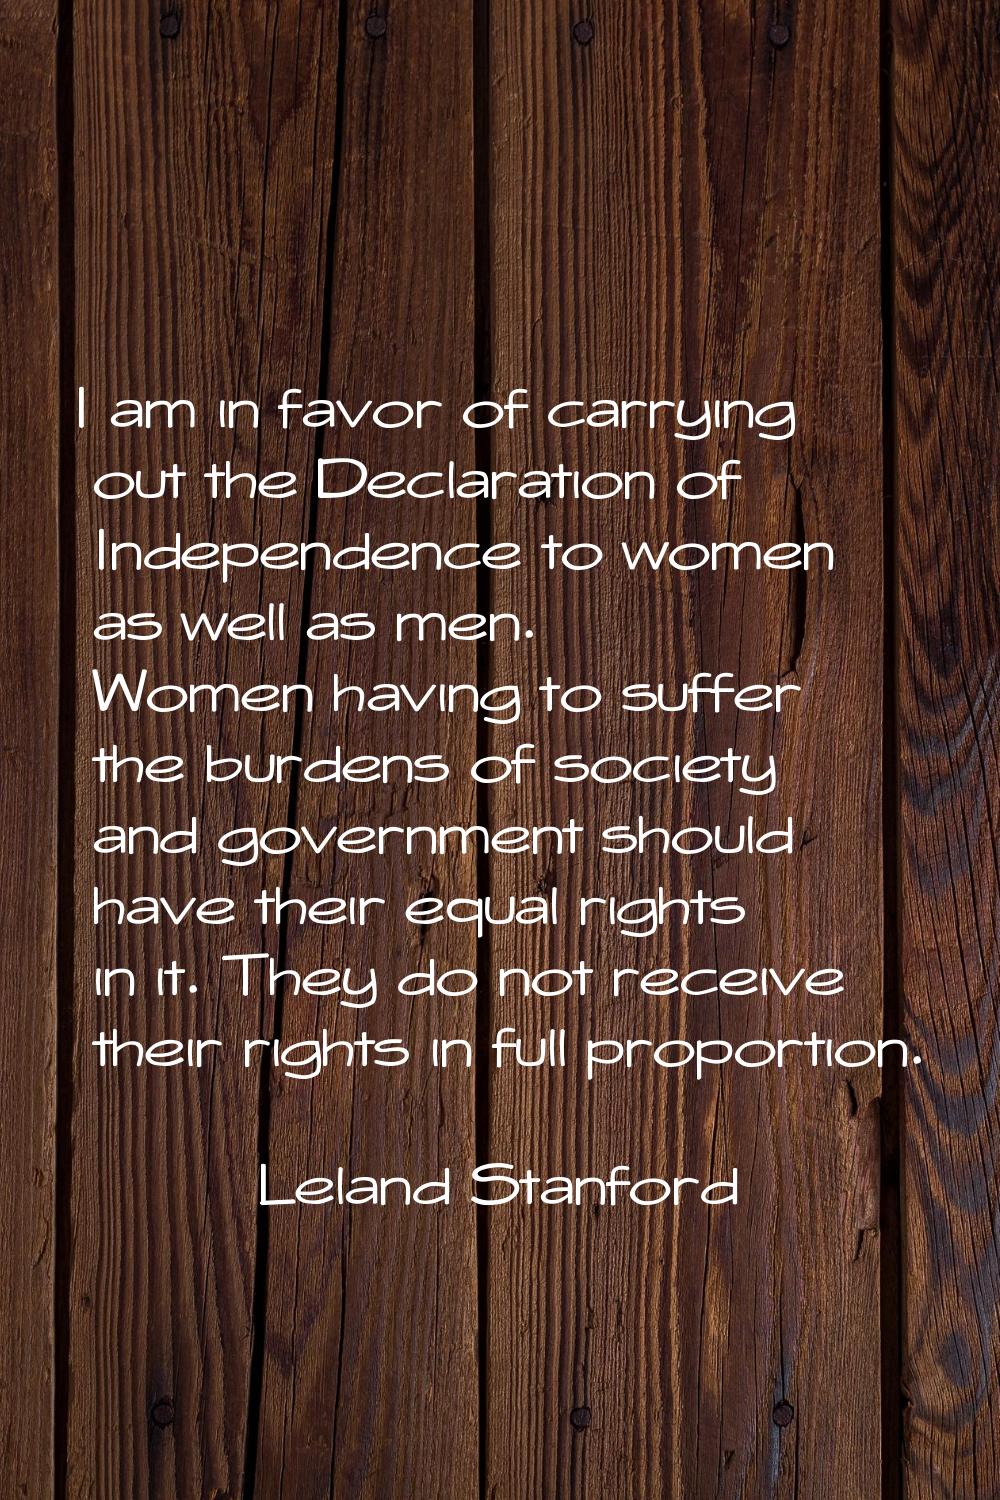 I am in favor of carrying out the Declaration of Independence to women as well as men. Women having